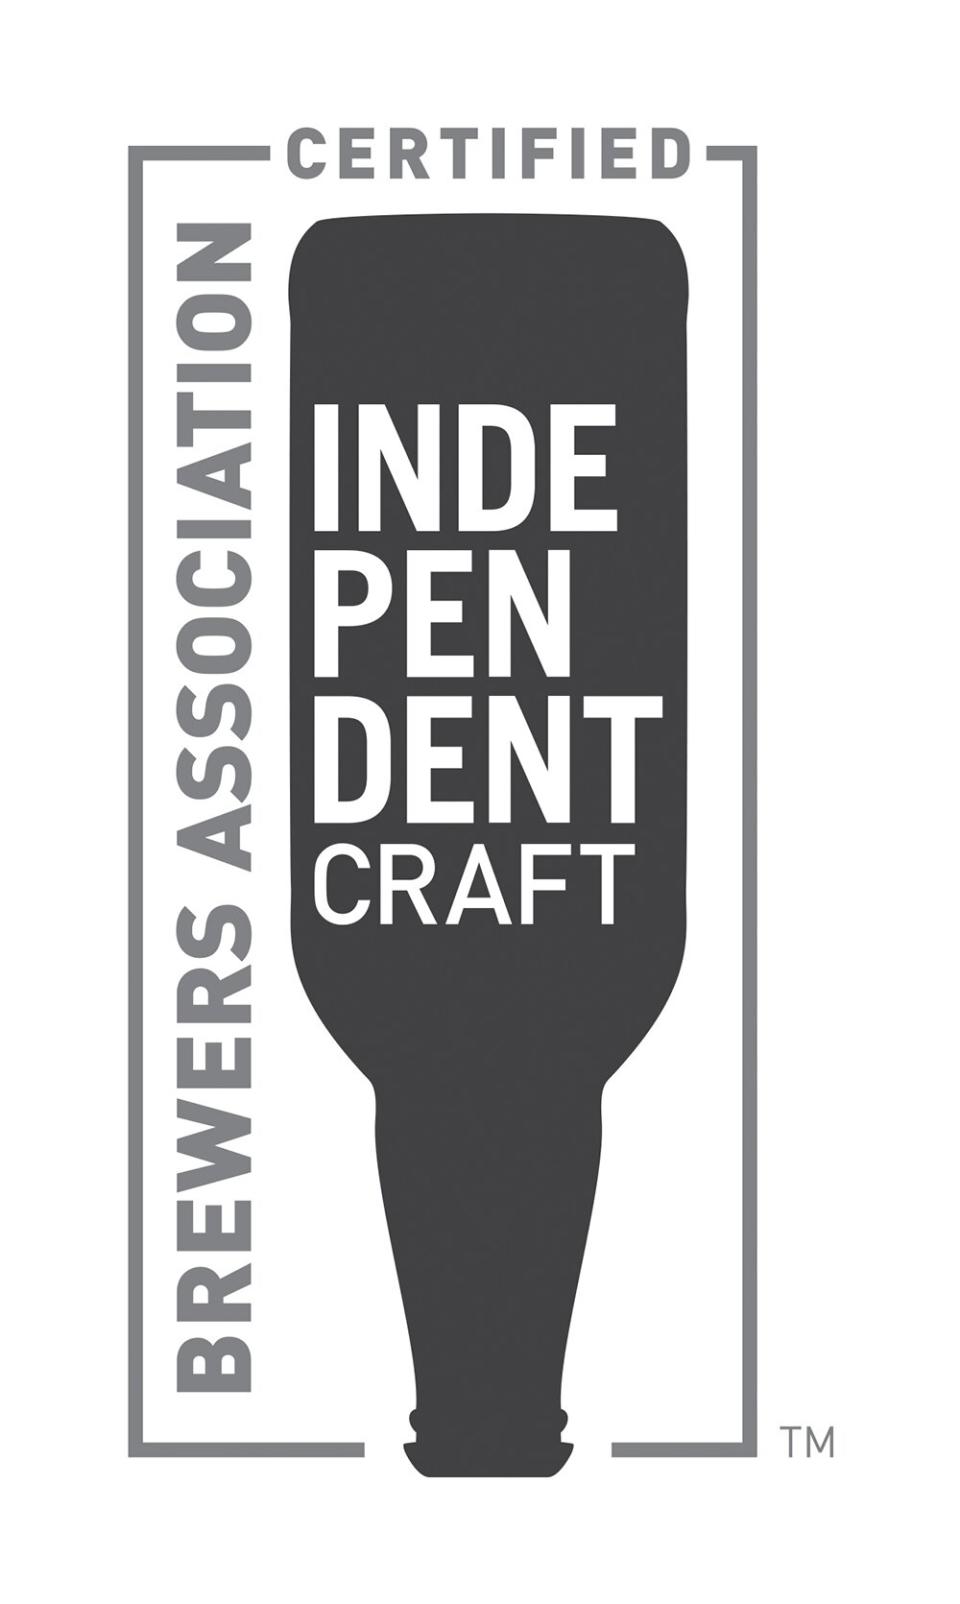 new seal for craft beers from beer association